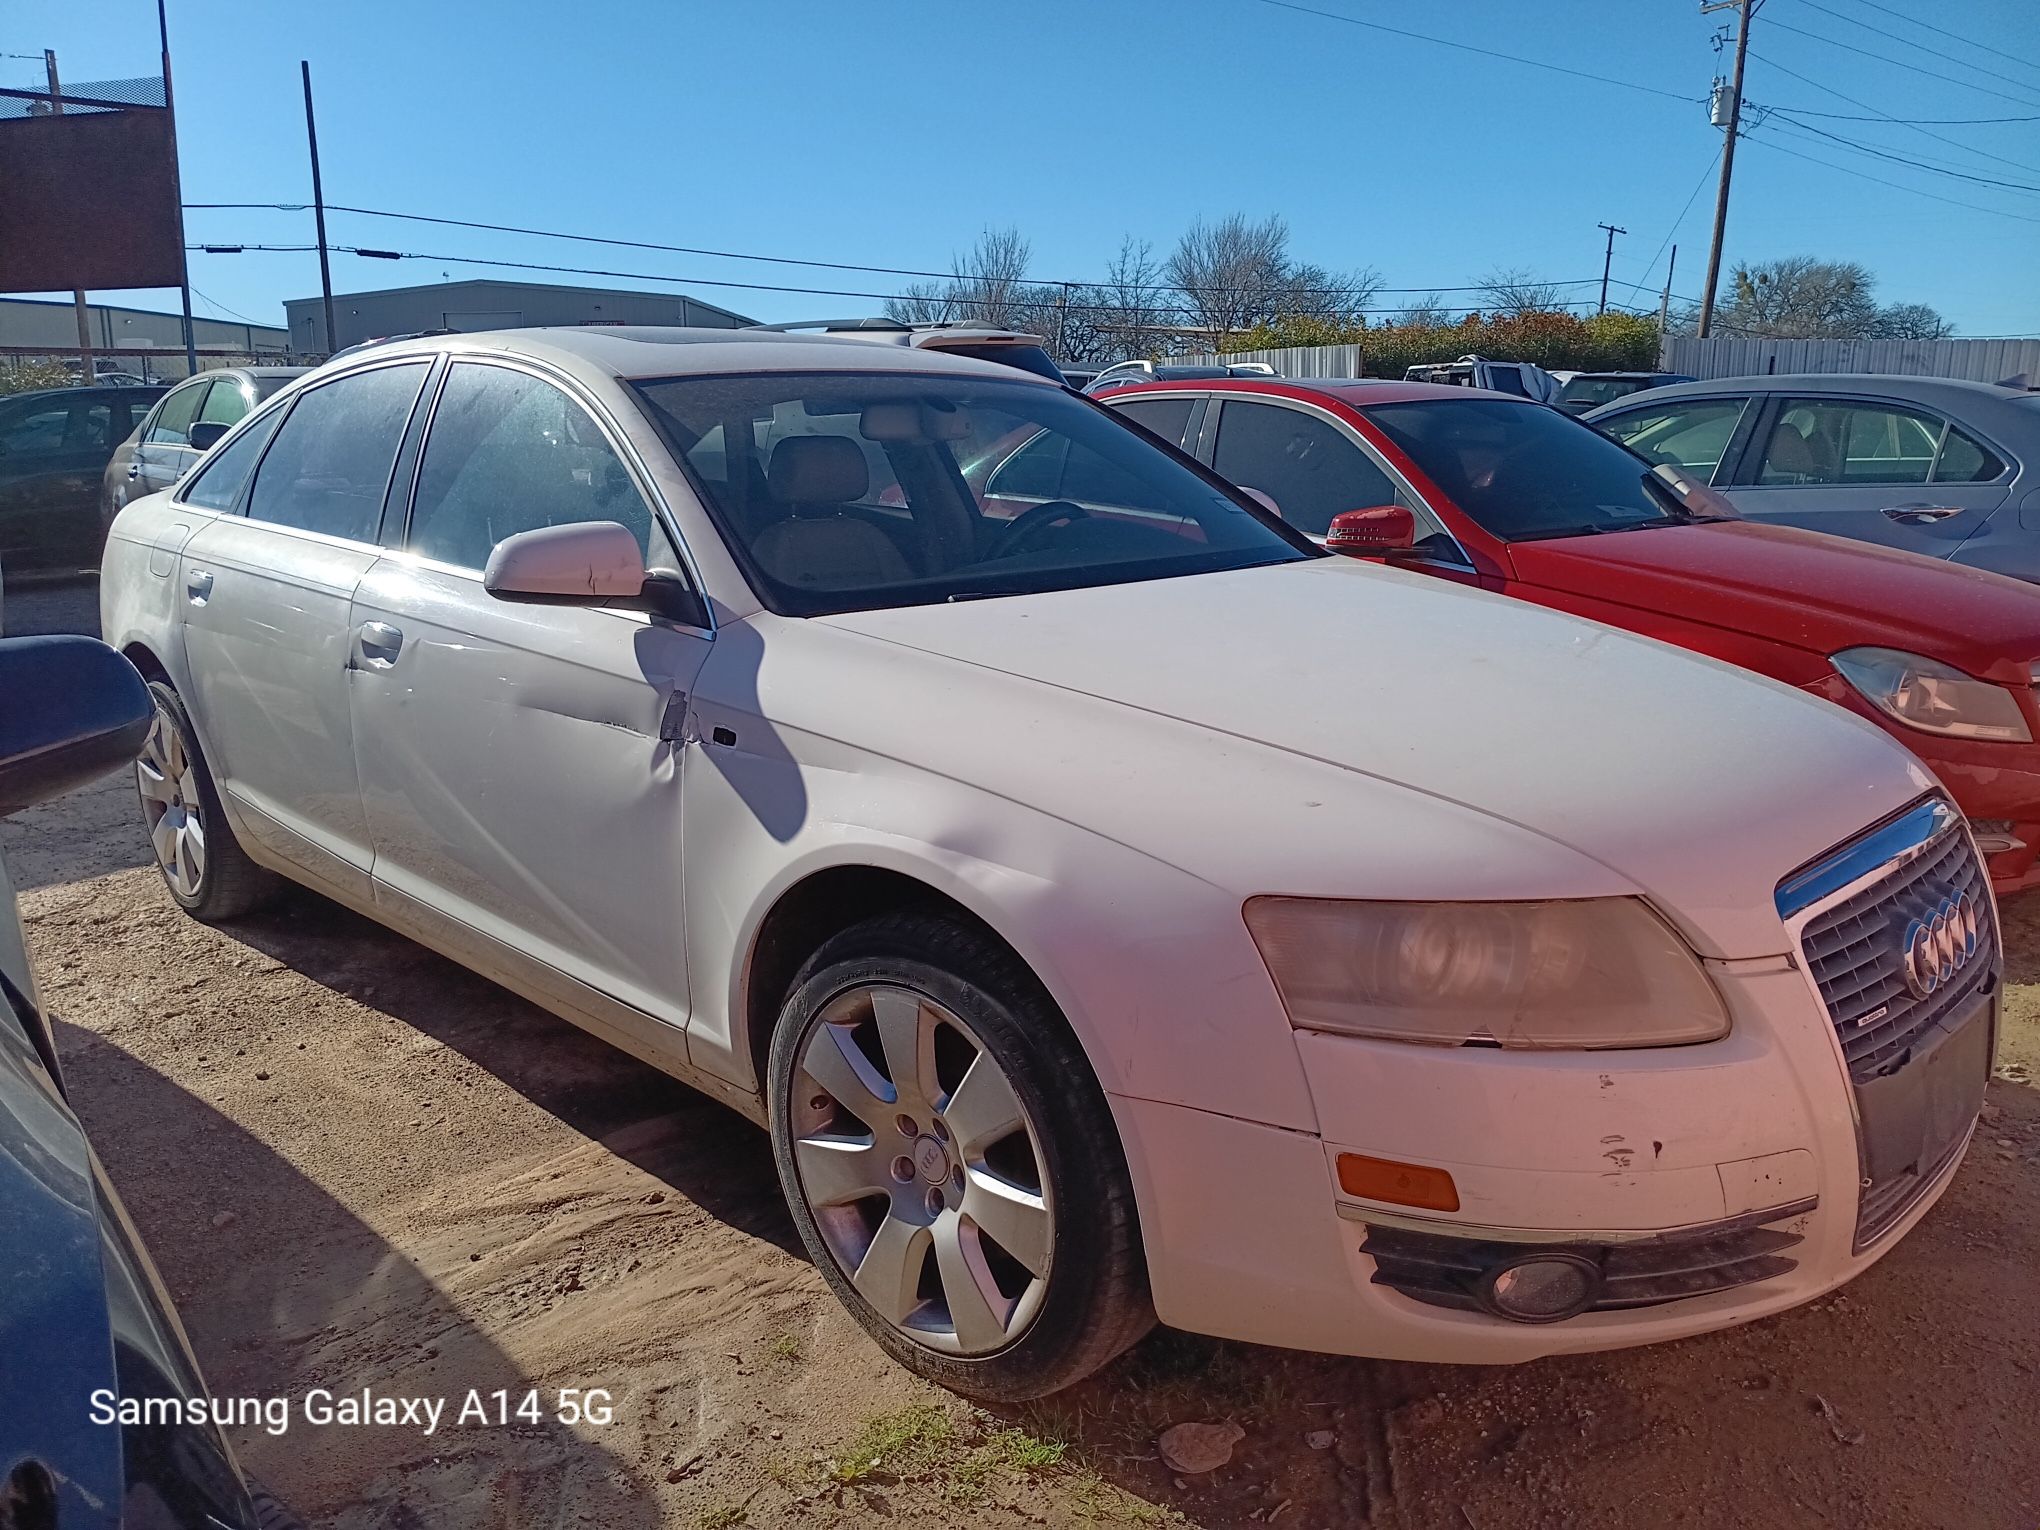 2006 Audi A6 - Parts Only #AD2